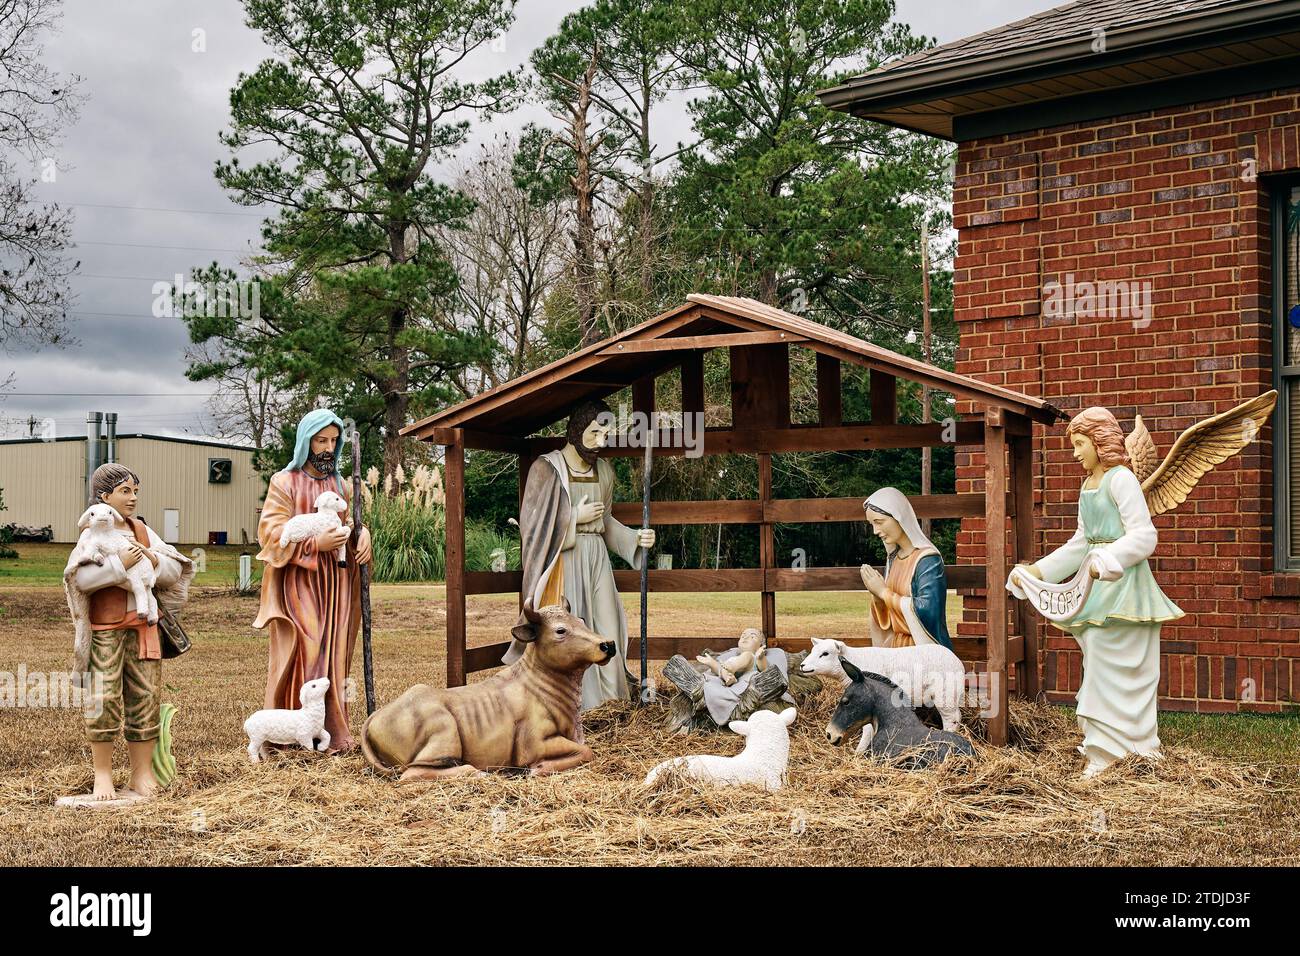 Outdoor nativity scene or display showing the baby Jesus in a manger along with Mary and Joseph and the wise men. Stock Photo